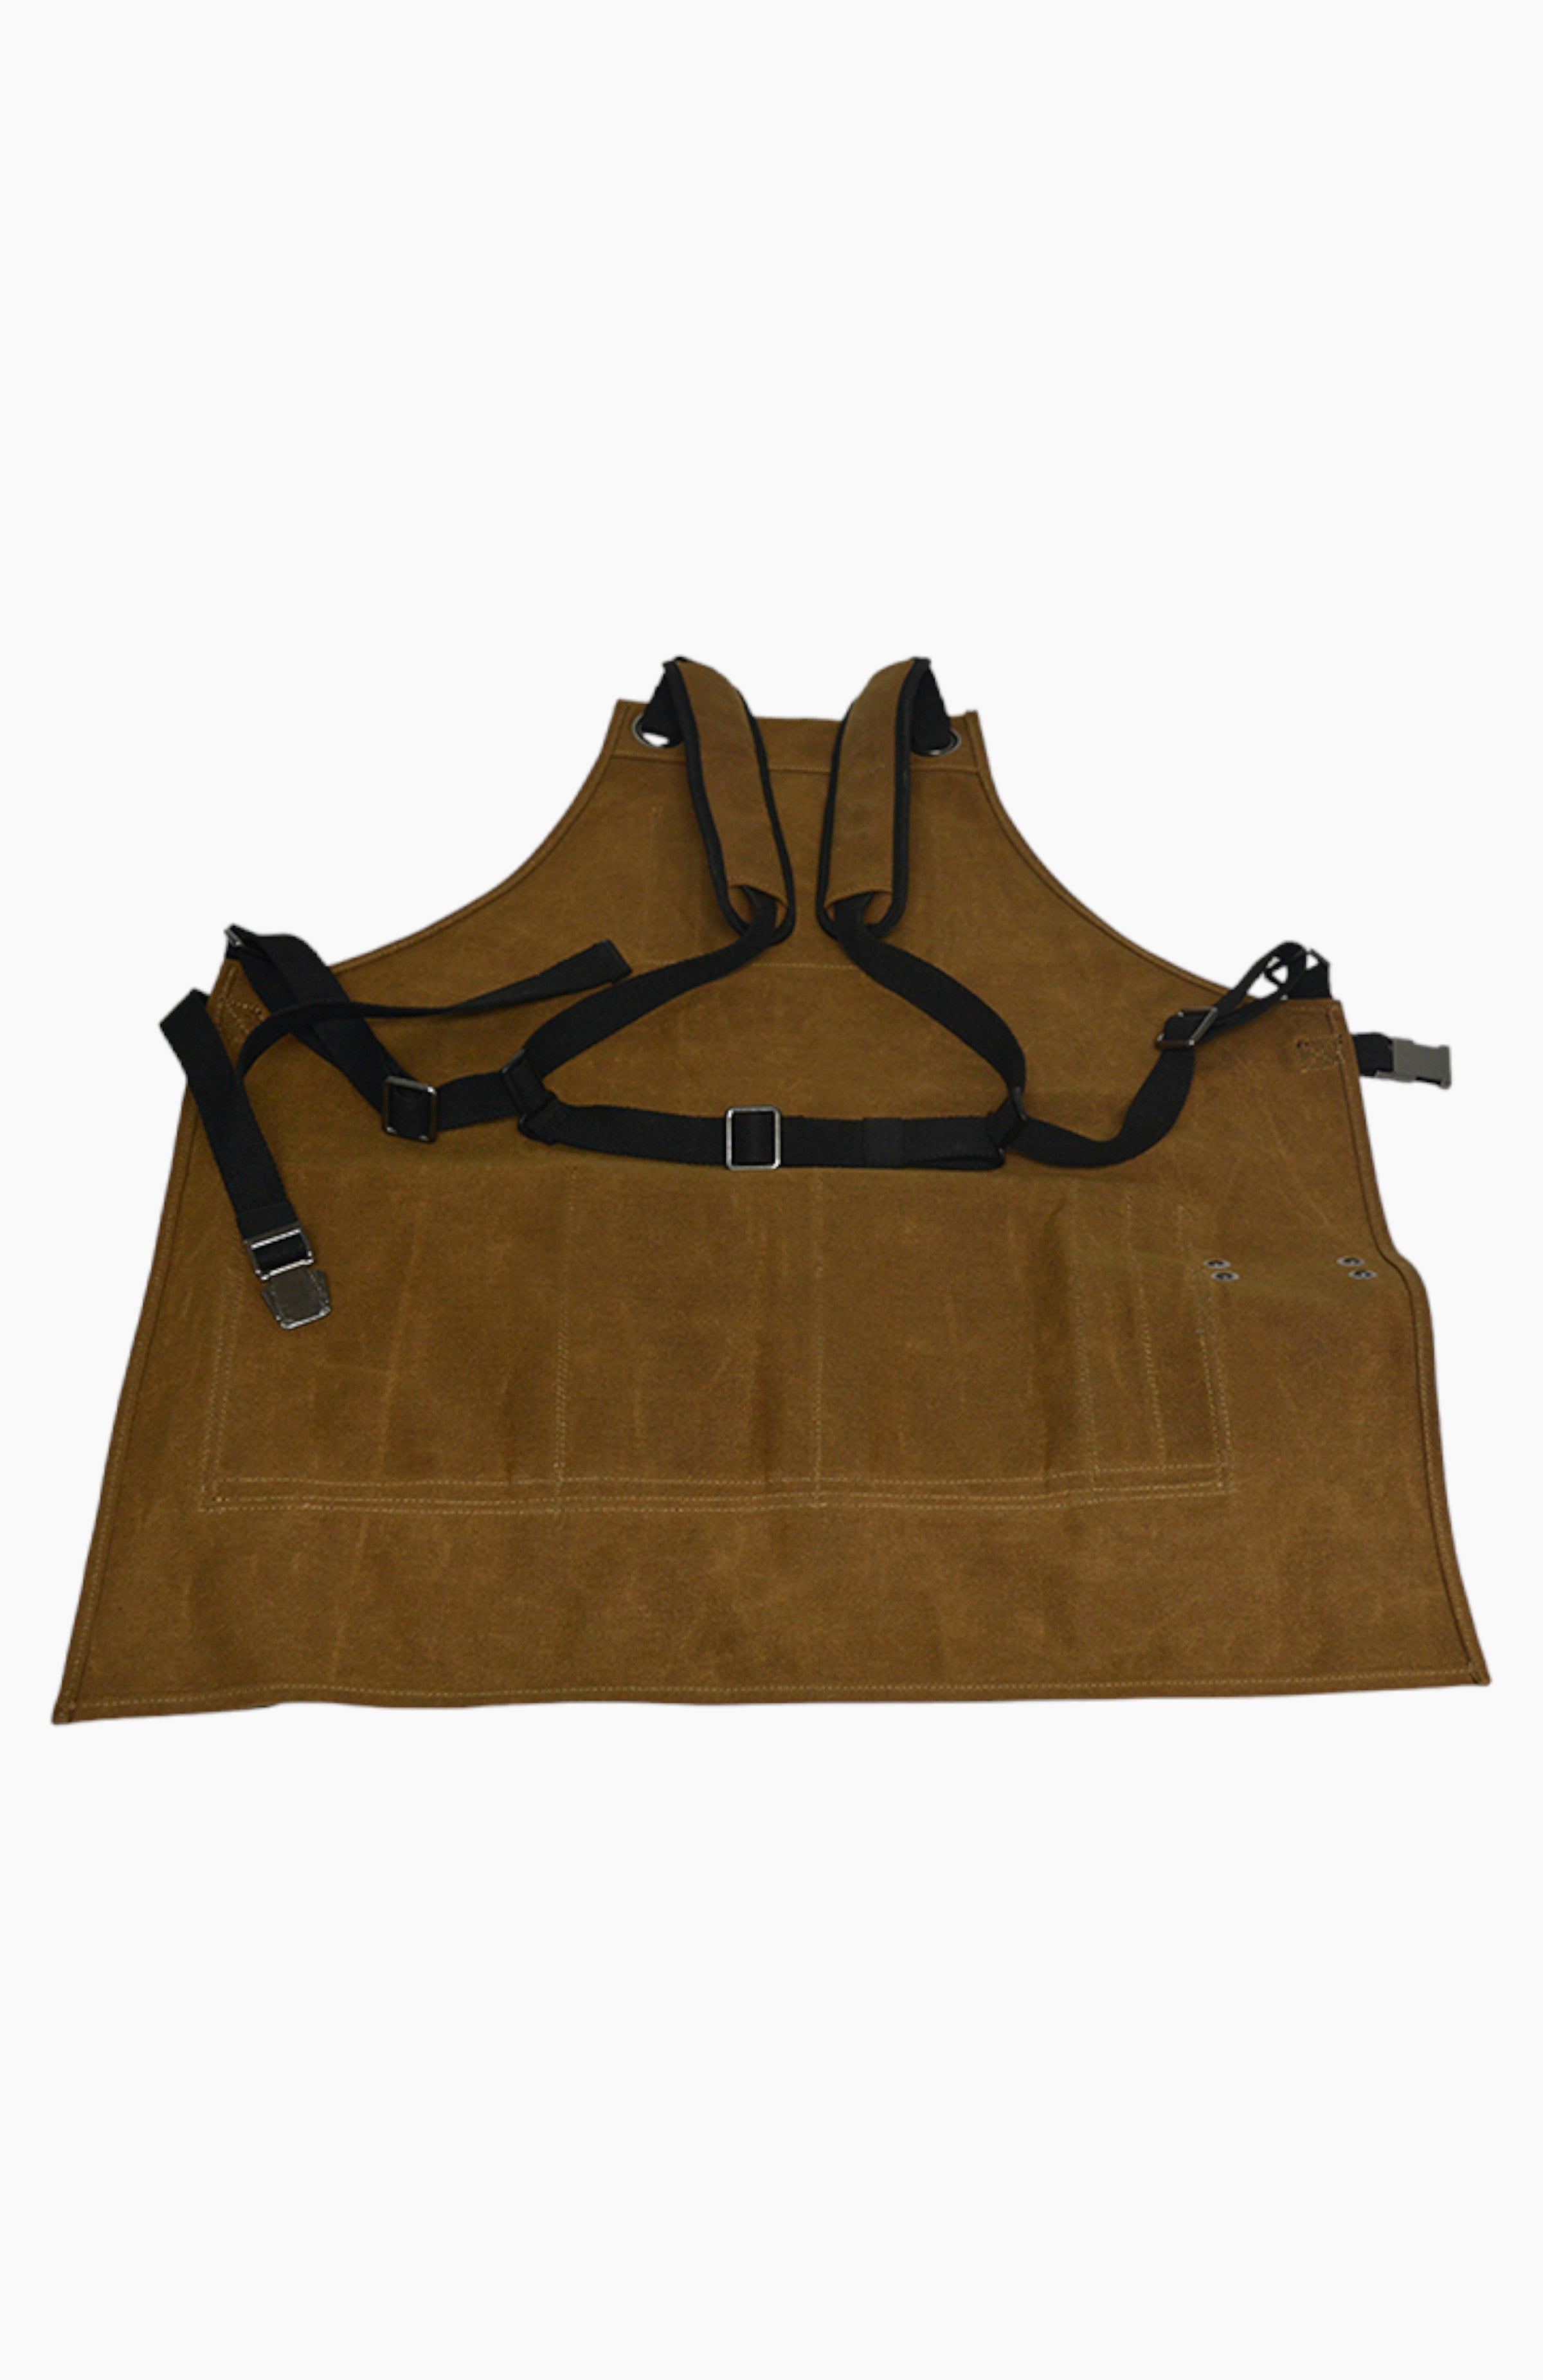 Brown leather apron with black straps and metal clasps.